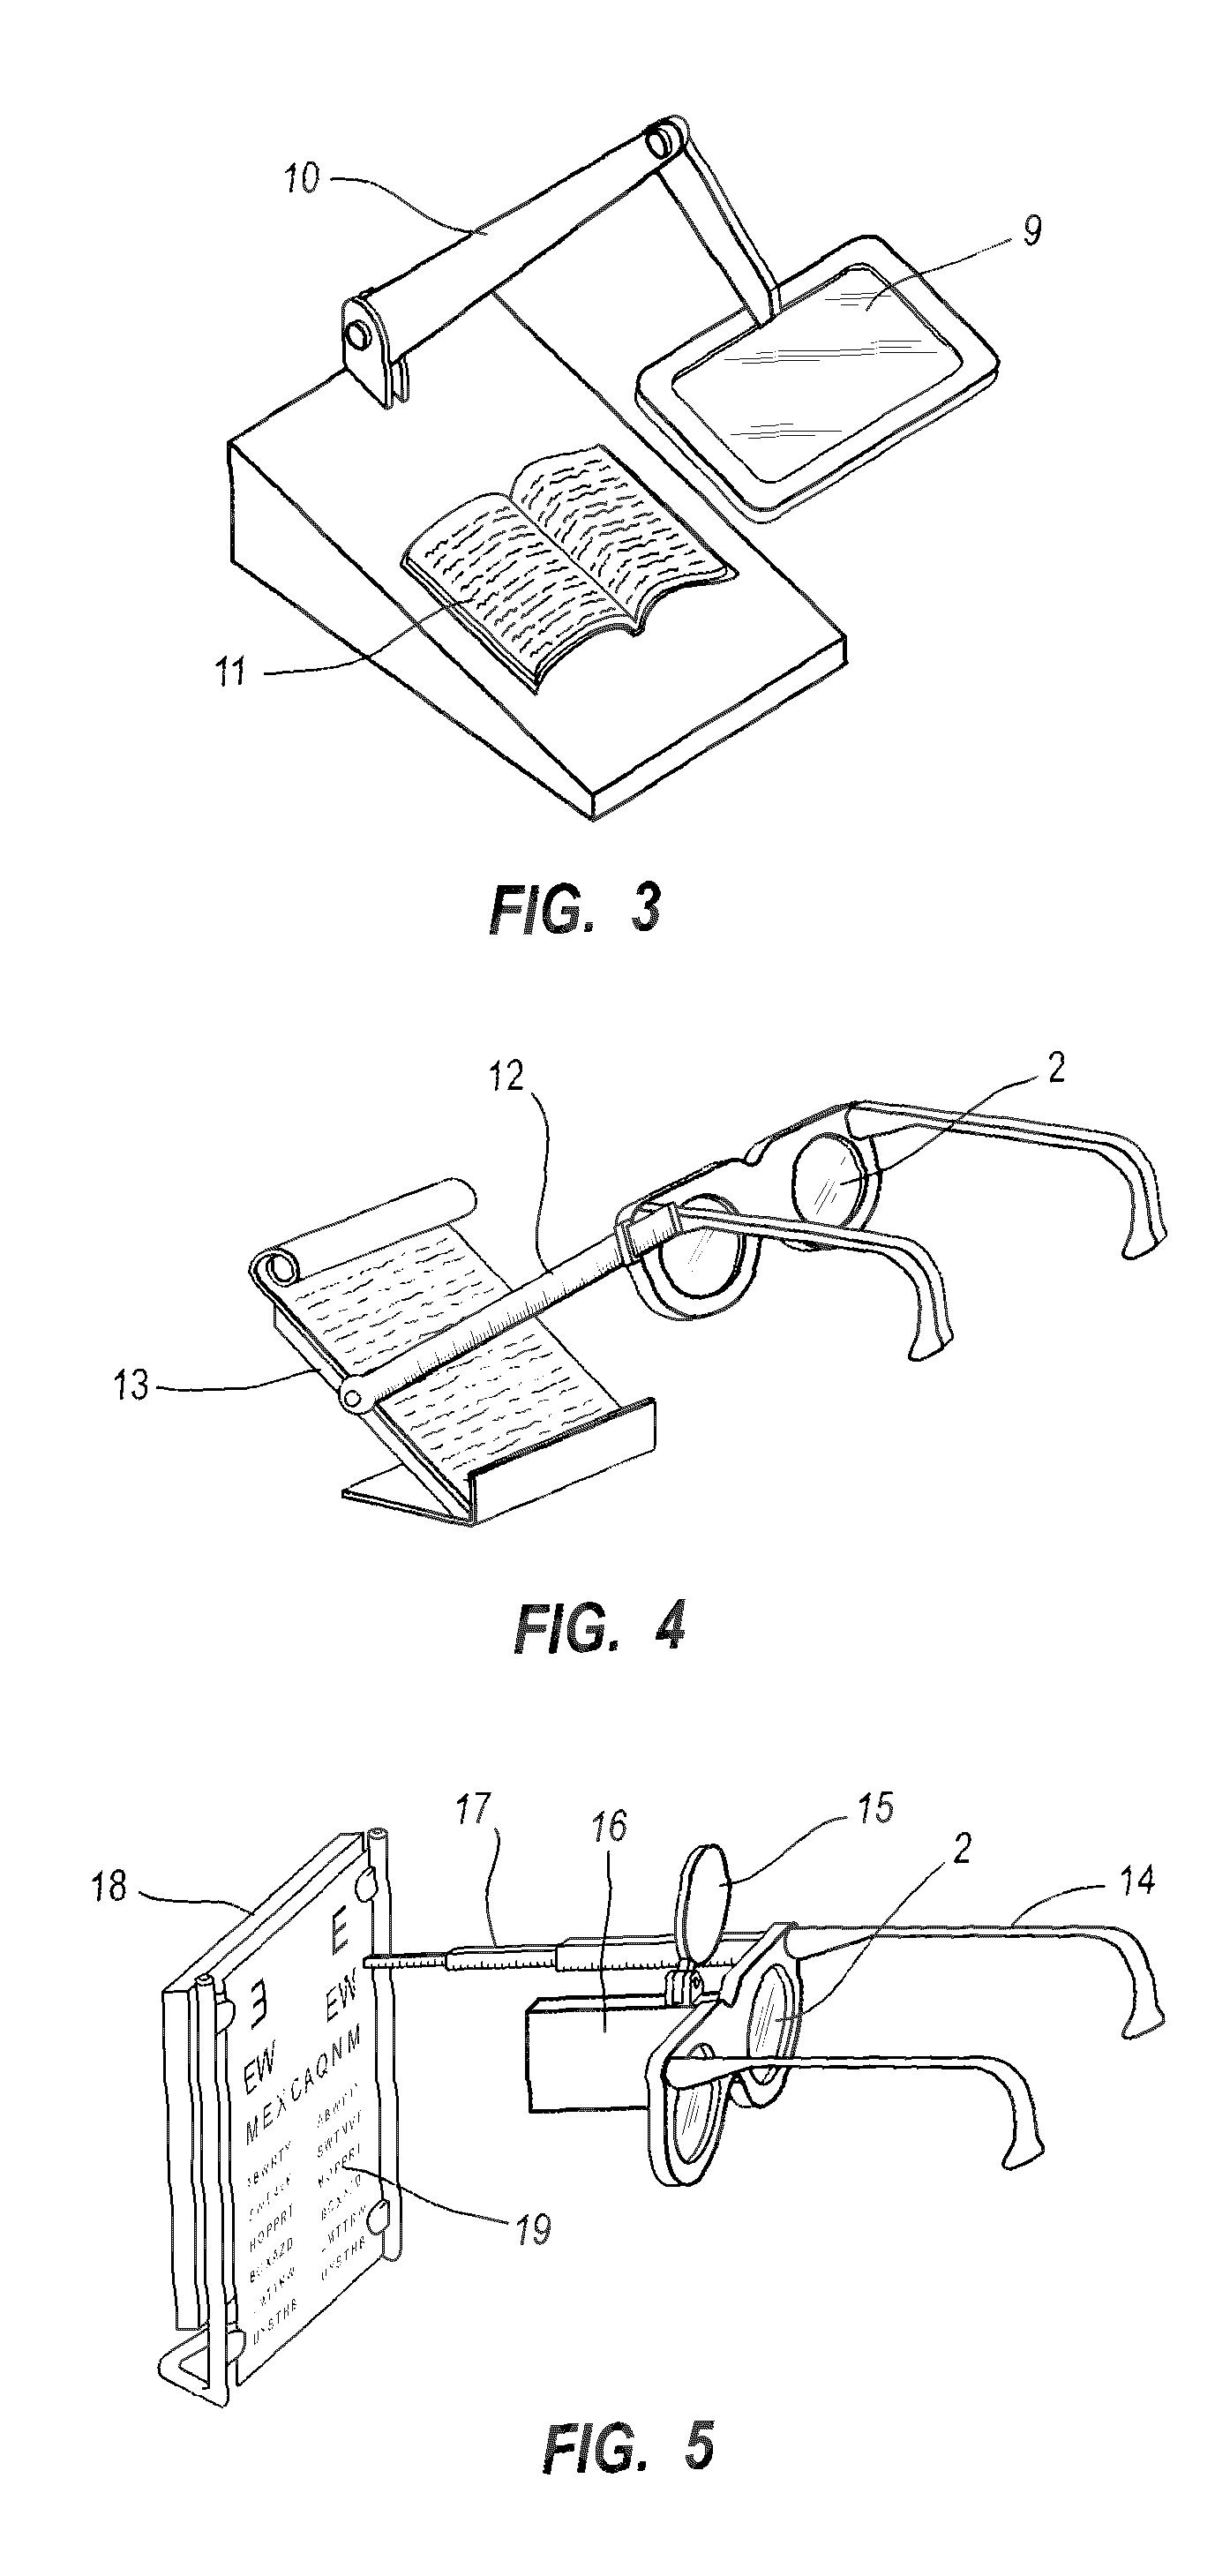 Device for preventing and treating myopia